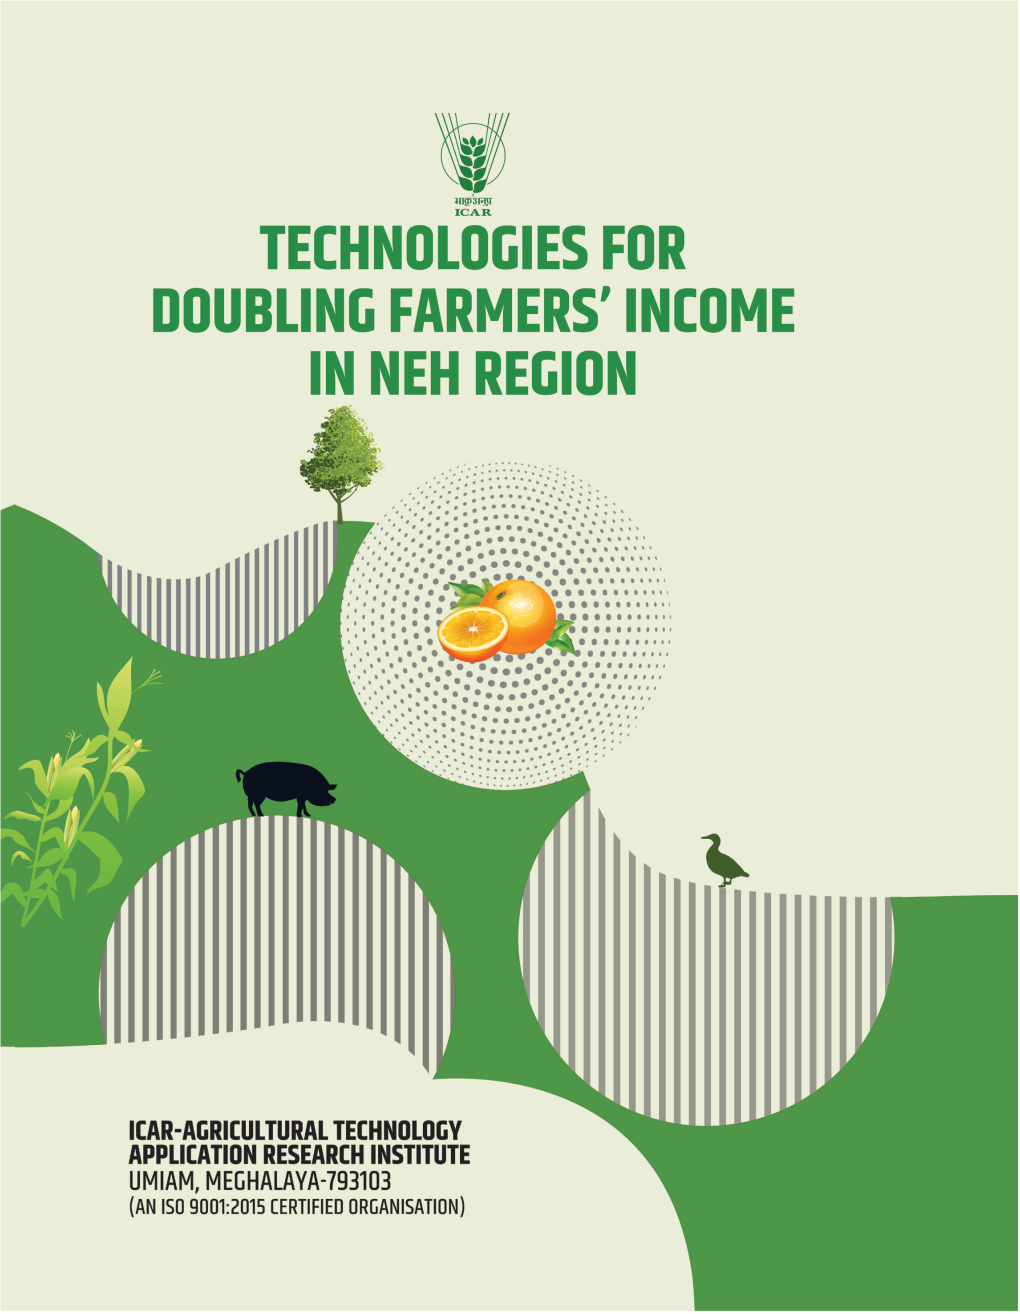 Technologies for Doubling Farmers' Income in NEH Region